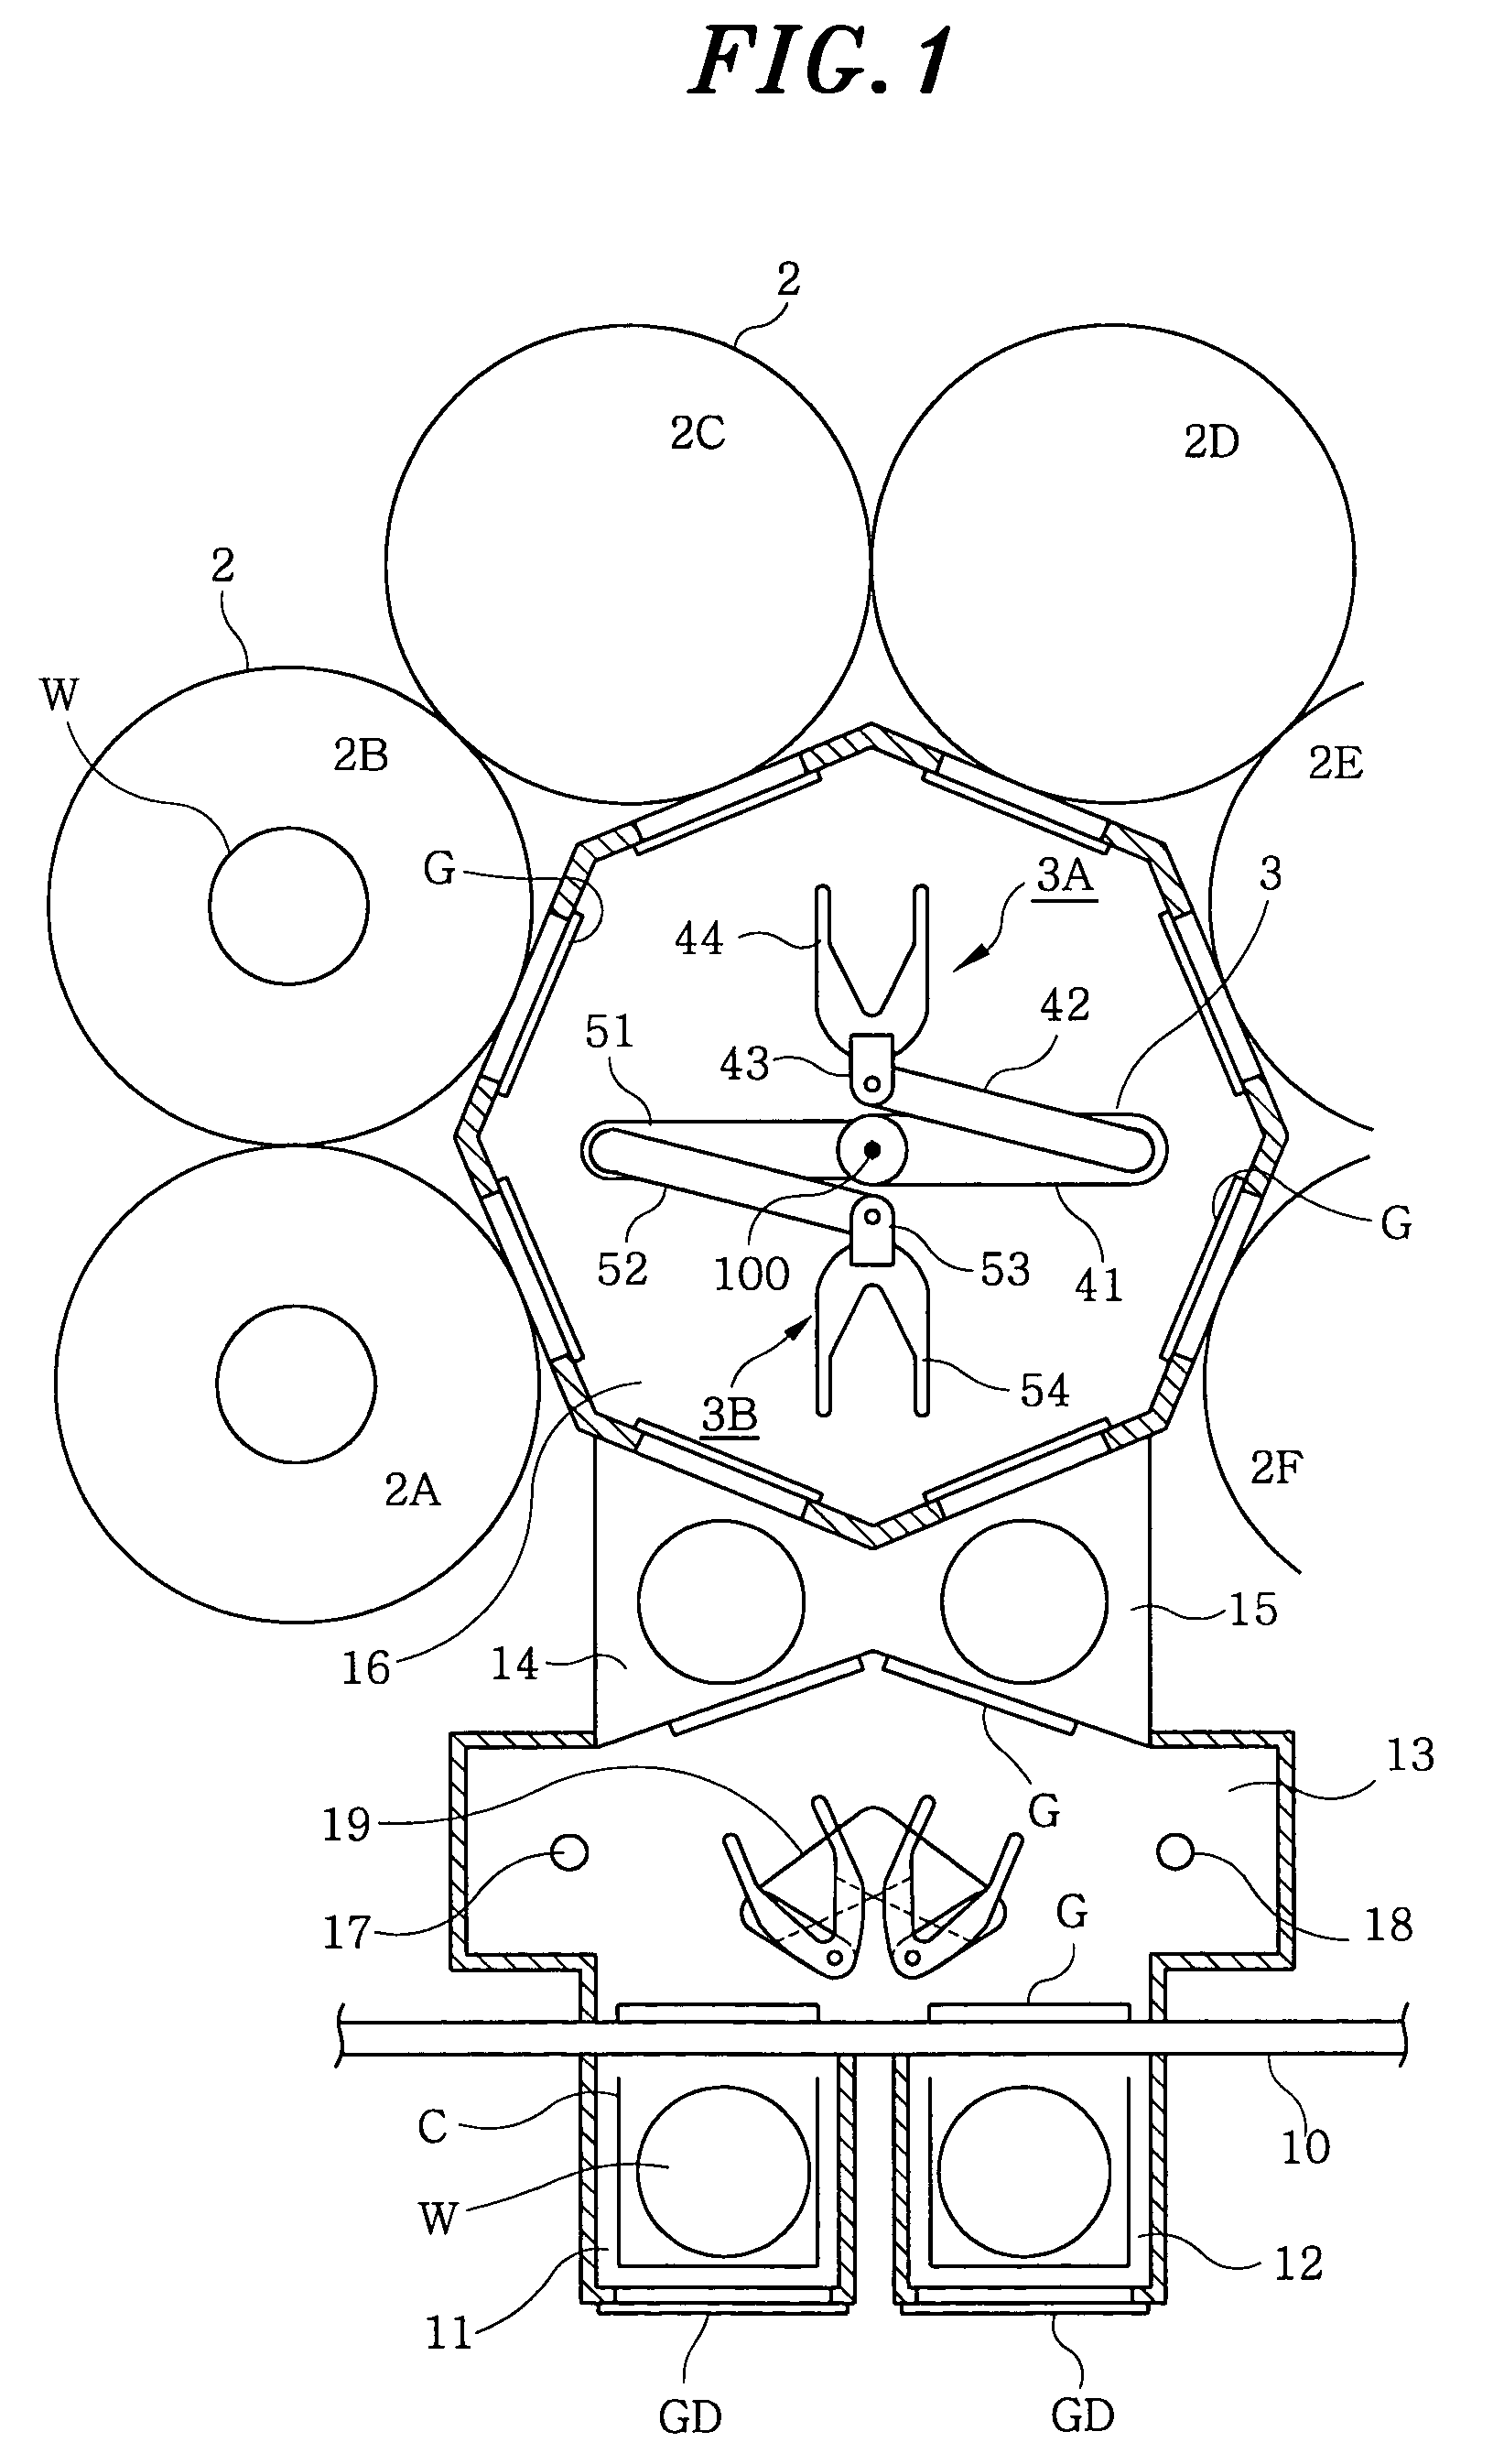 Substrate processing apparatus and substrate transferring method